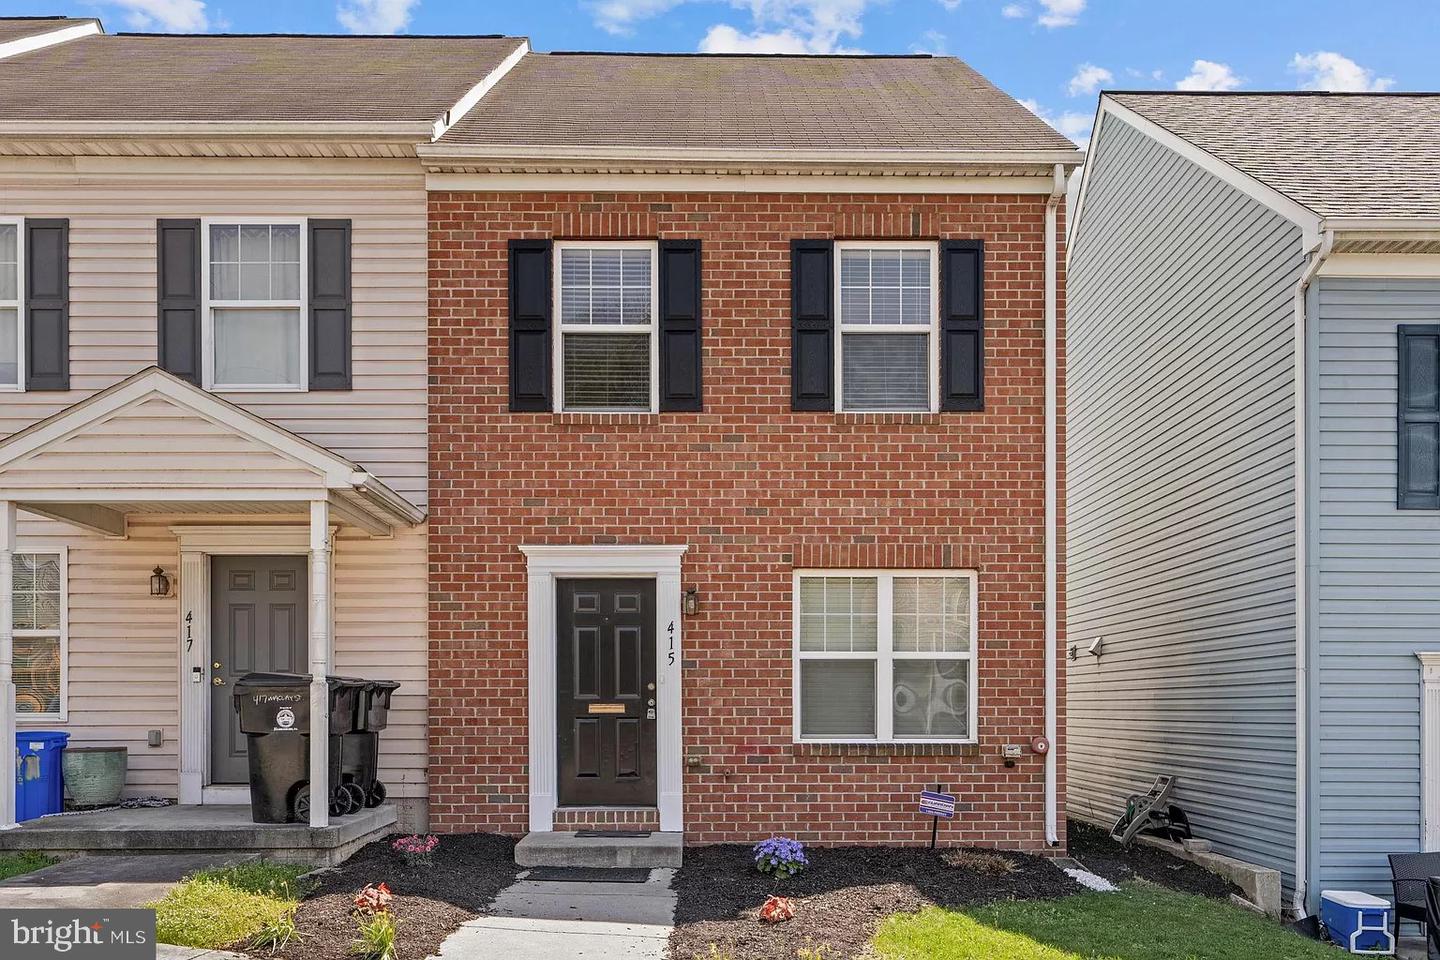 View Harrisburg, PA 17110 townhome